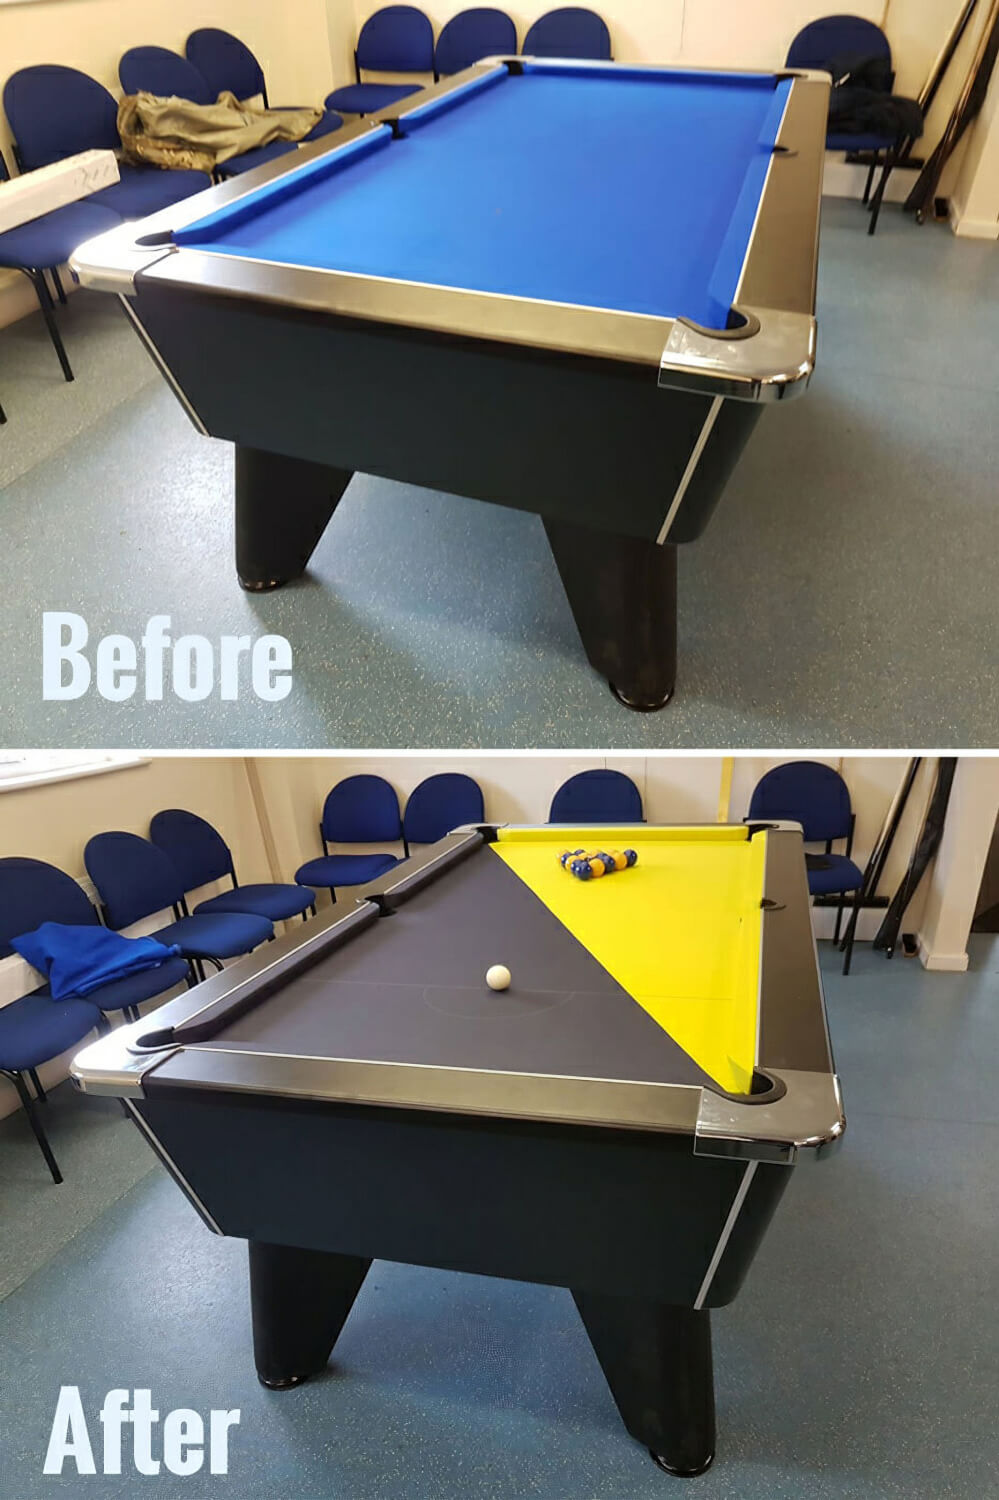 POOL TABLE RECOVERRECOVERINGACCESSORIES AND REPAIR SERVICE UK 